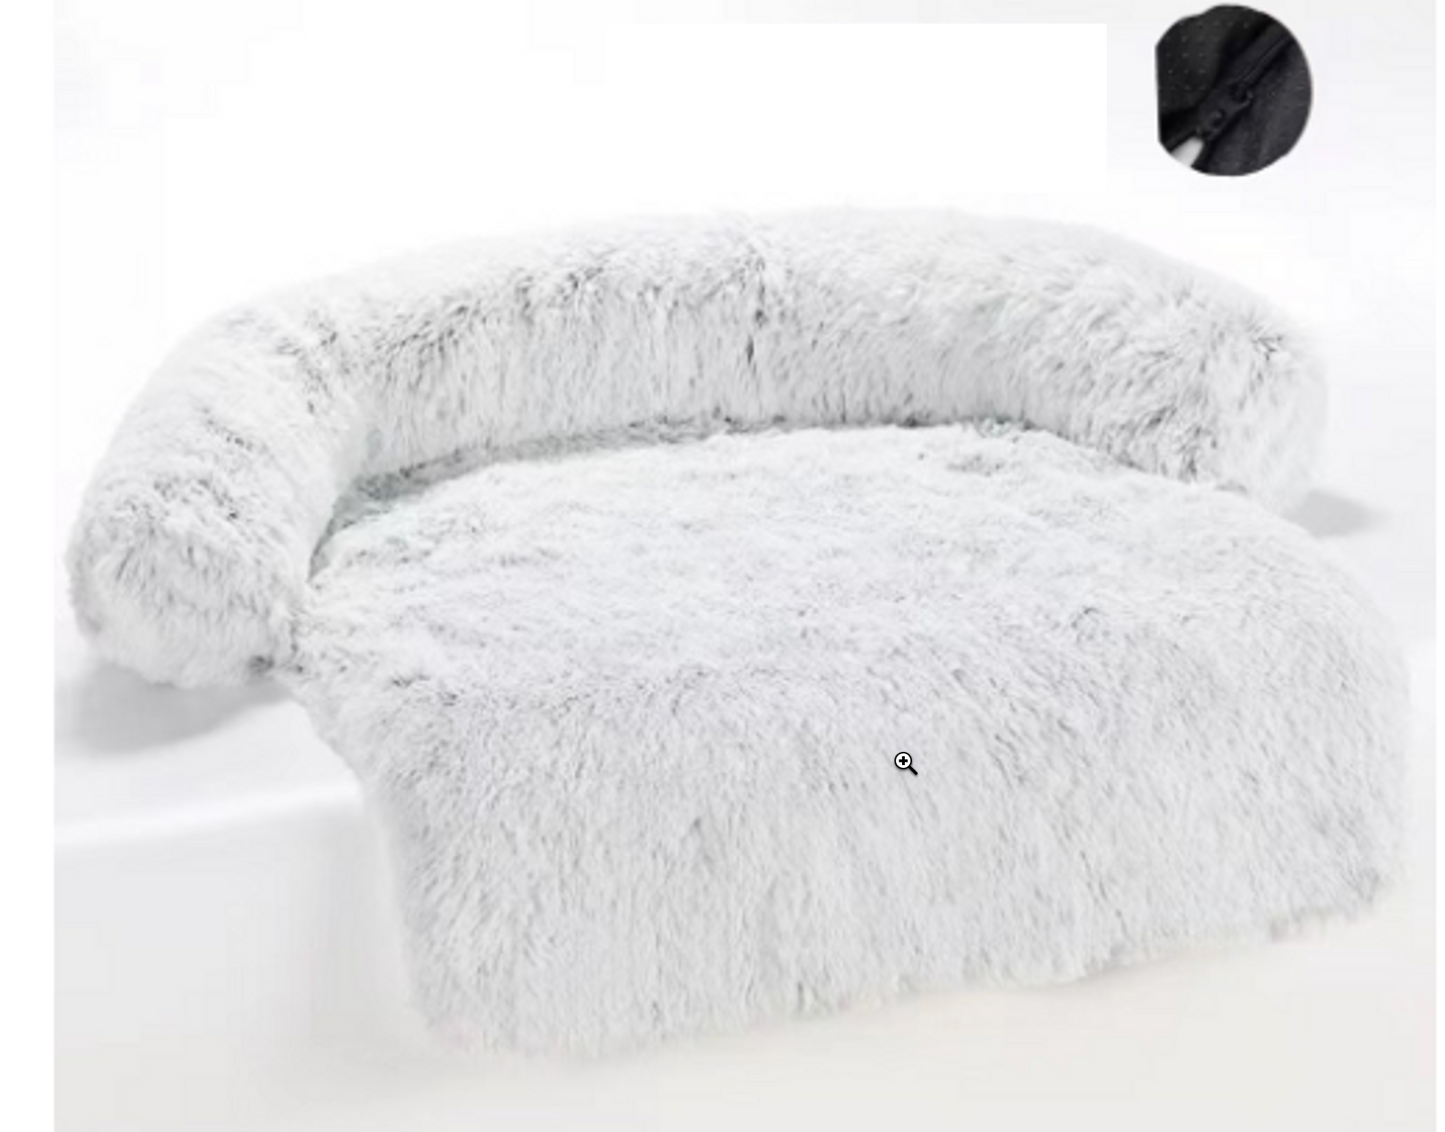 Dog Bed for couches